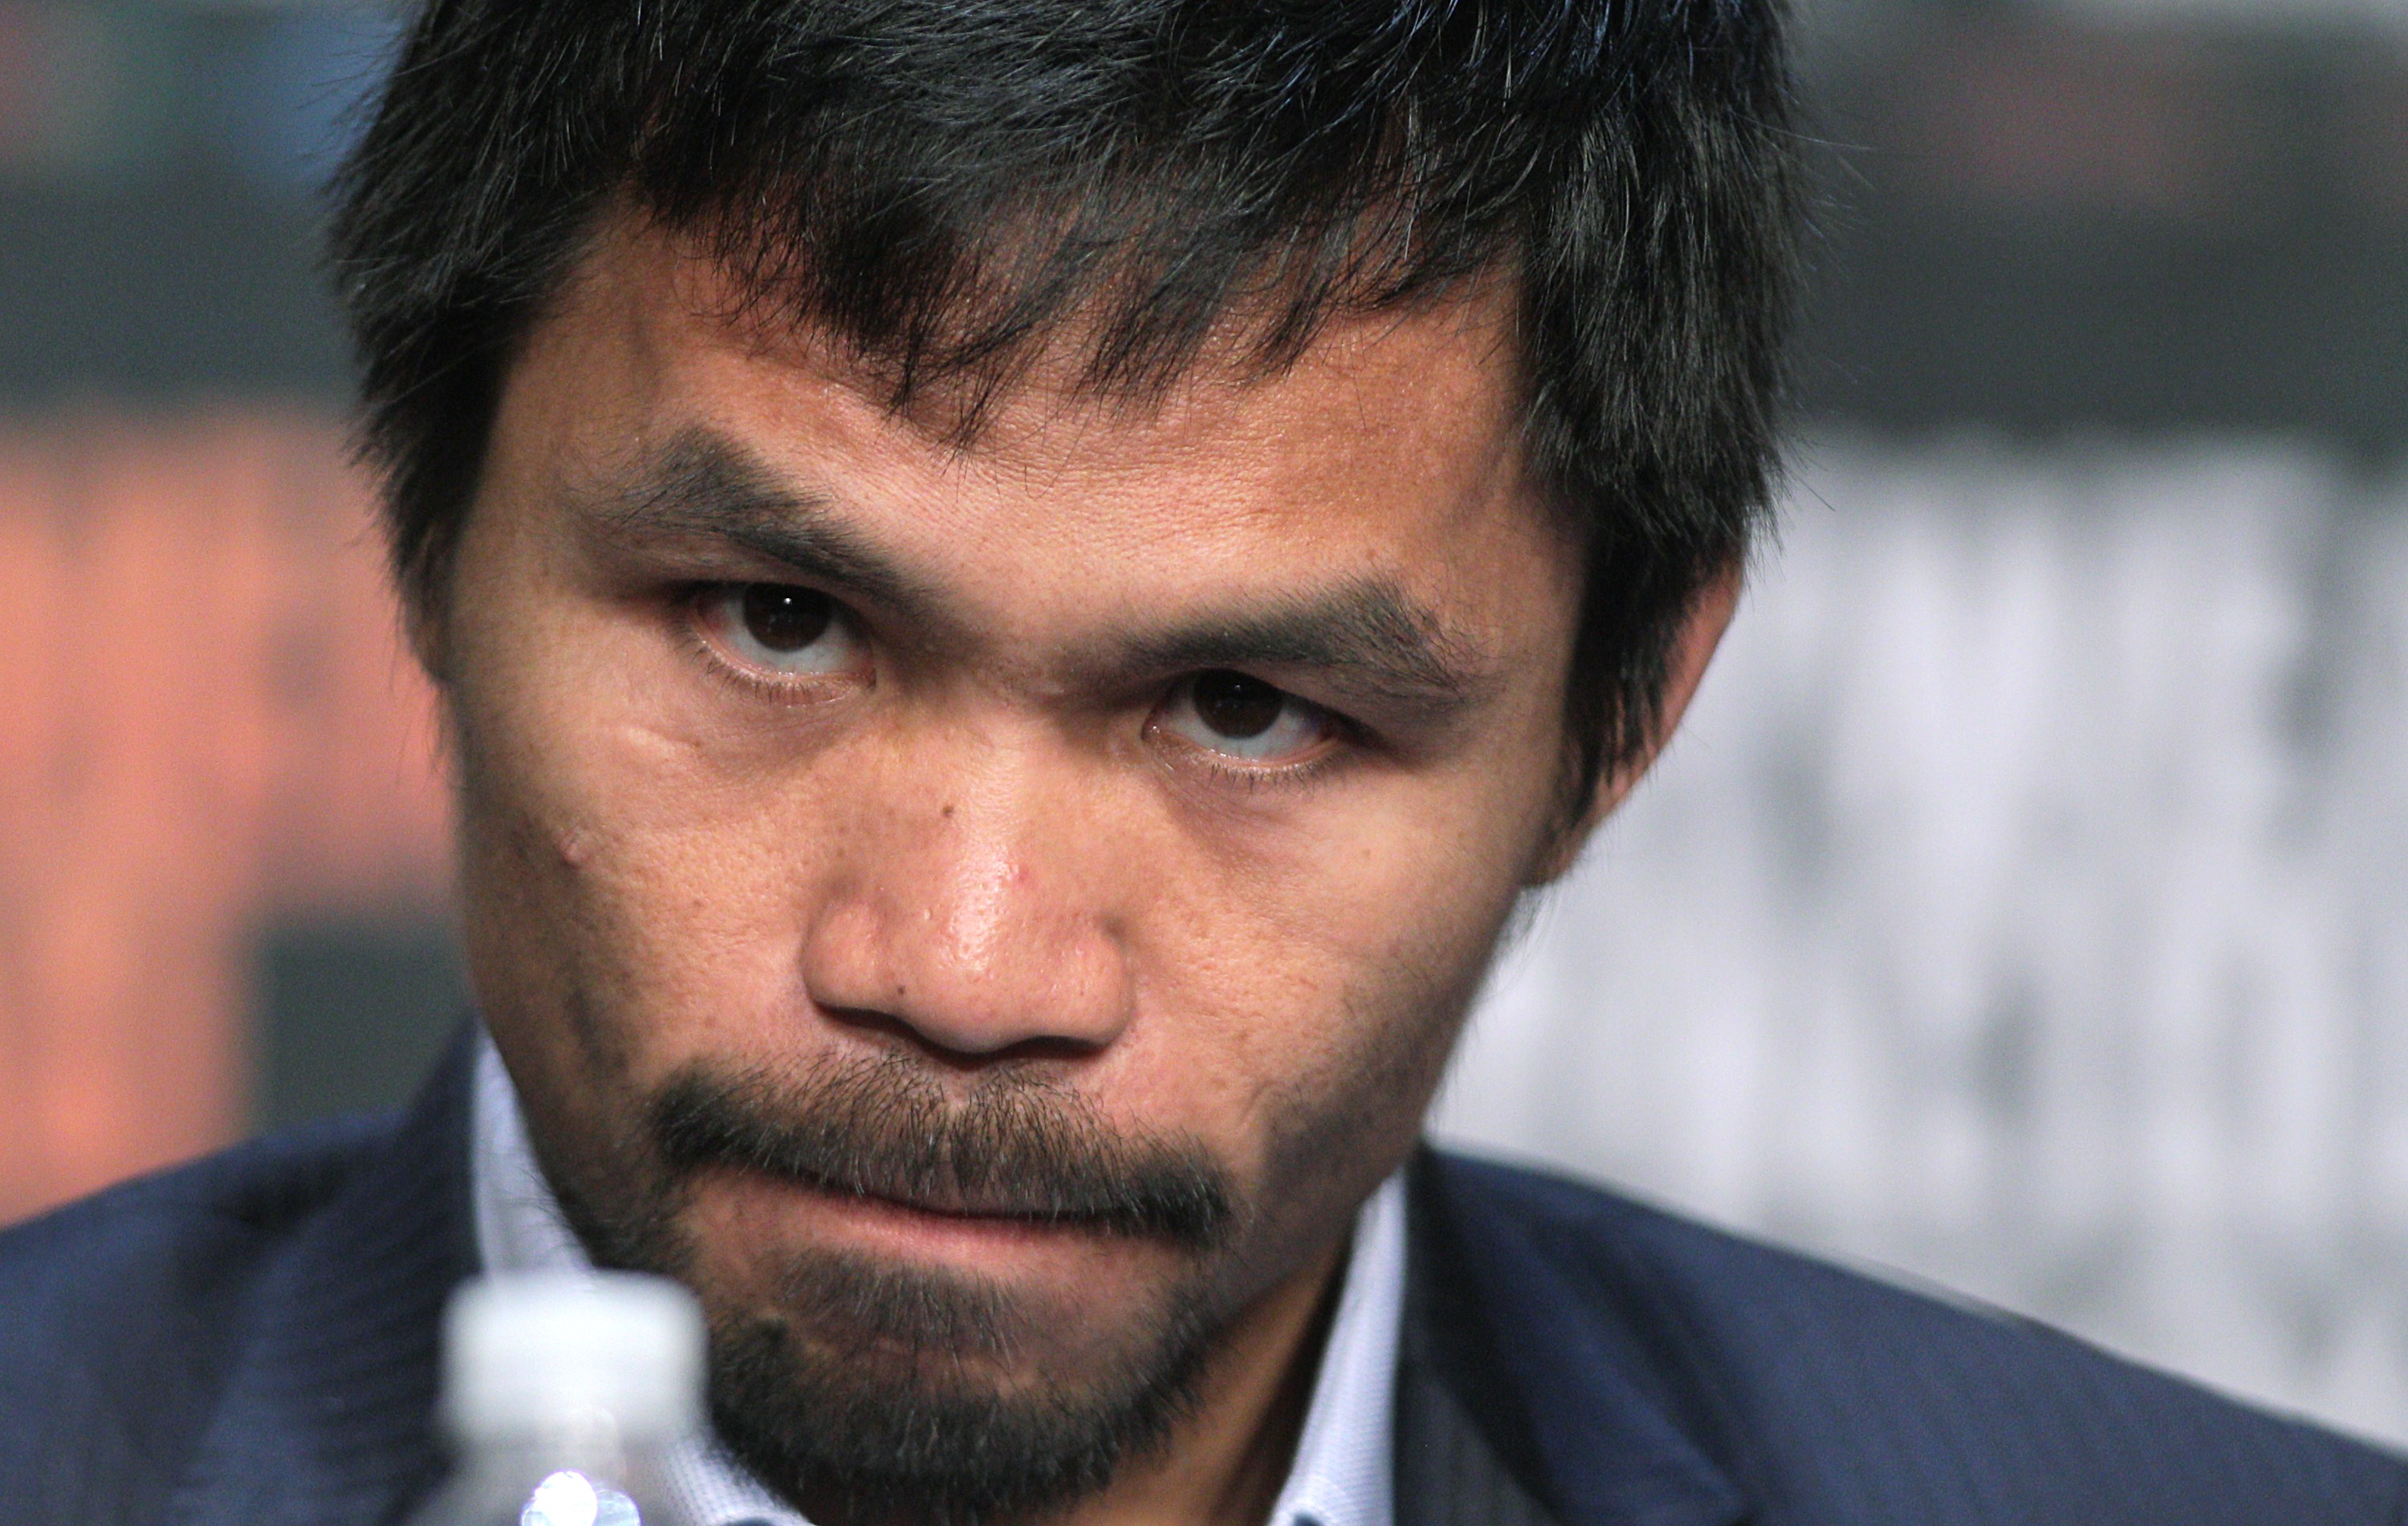 WBO welterweight champion Manny Pacquiao listens during a news conference at the KA Theatre at MGM Grand Hotel &amp; Casino in Las Vegas, April 29, 2015. (John Gurzinski—AFP/Getty Images)